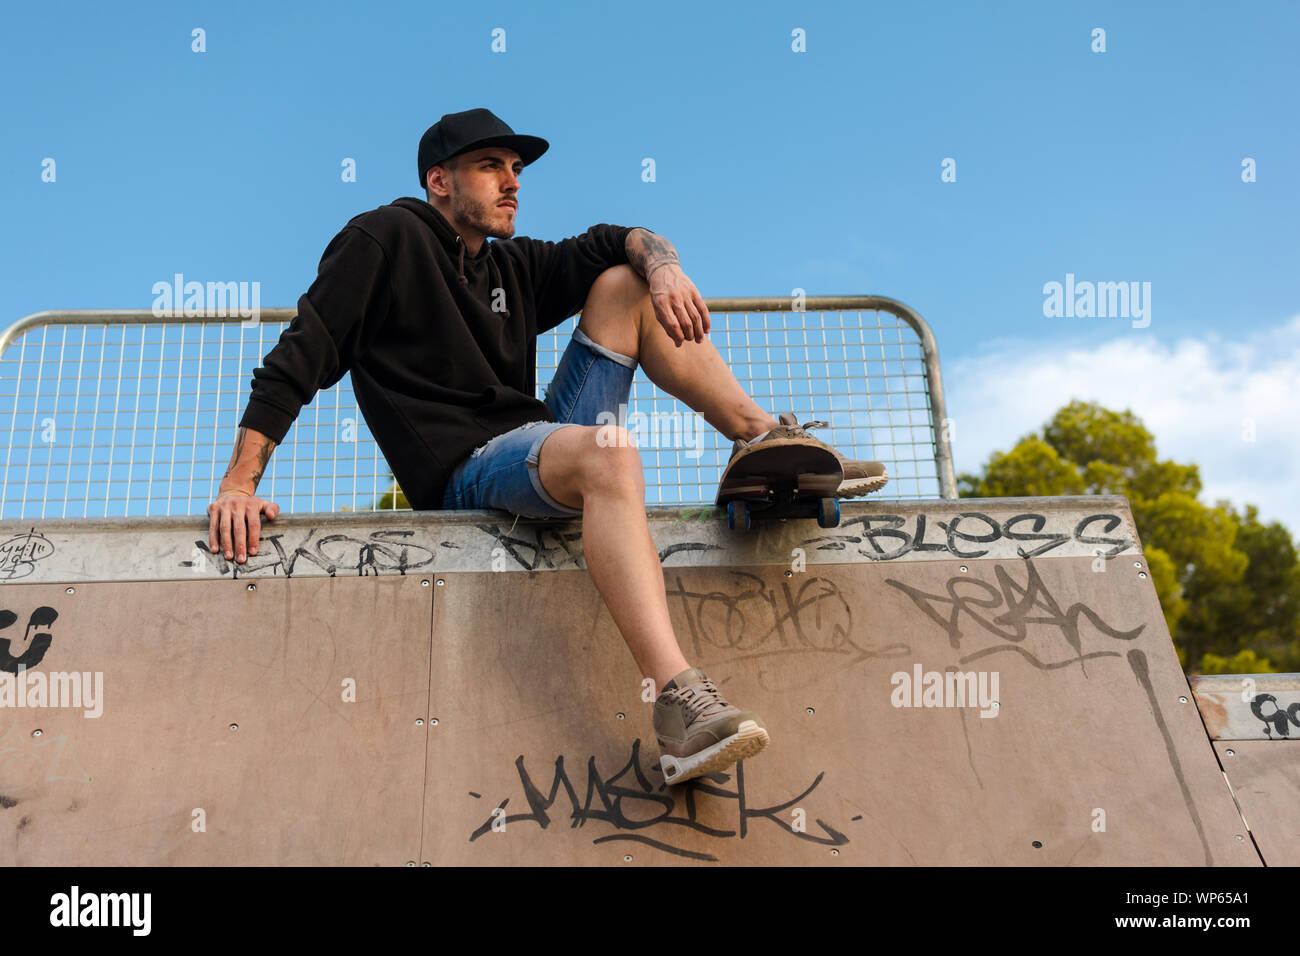 Young man on a skate in a skating court Stock Photo